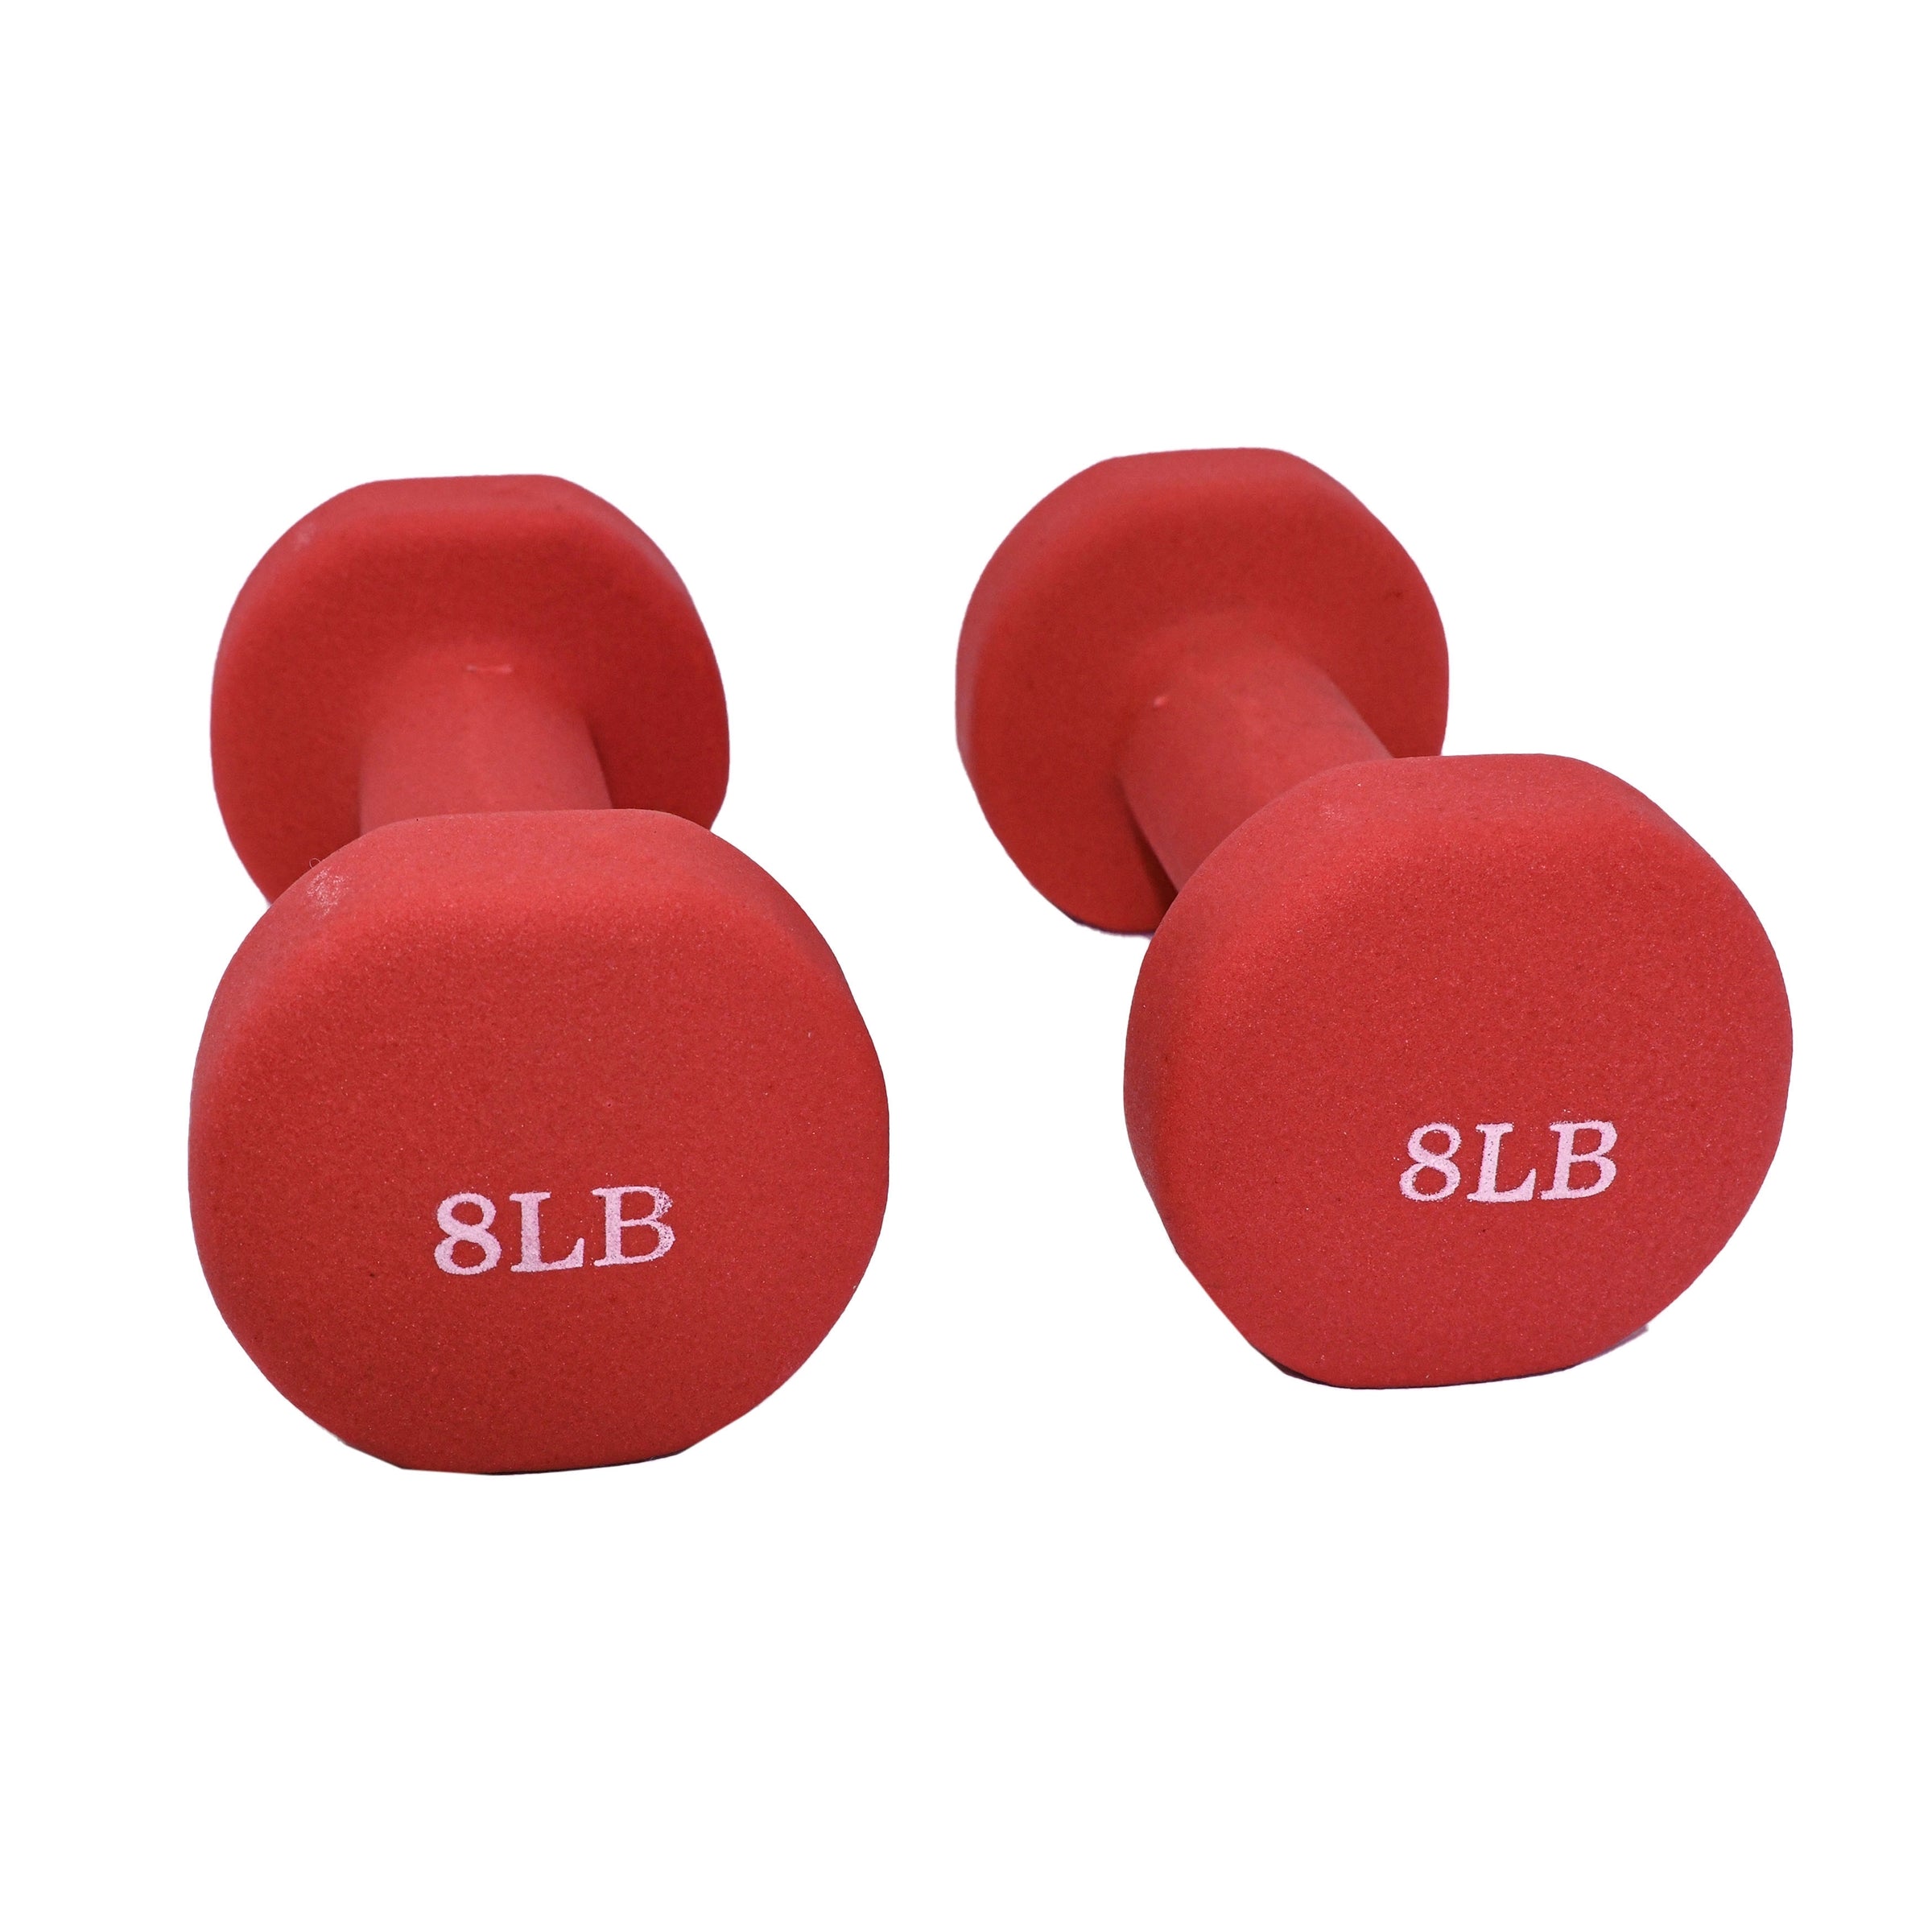 Non-Slip Hexagonal Shaped Free Weight Dumbbells Red - Set of 2